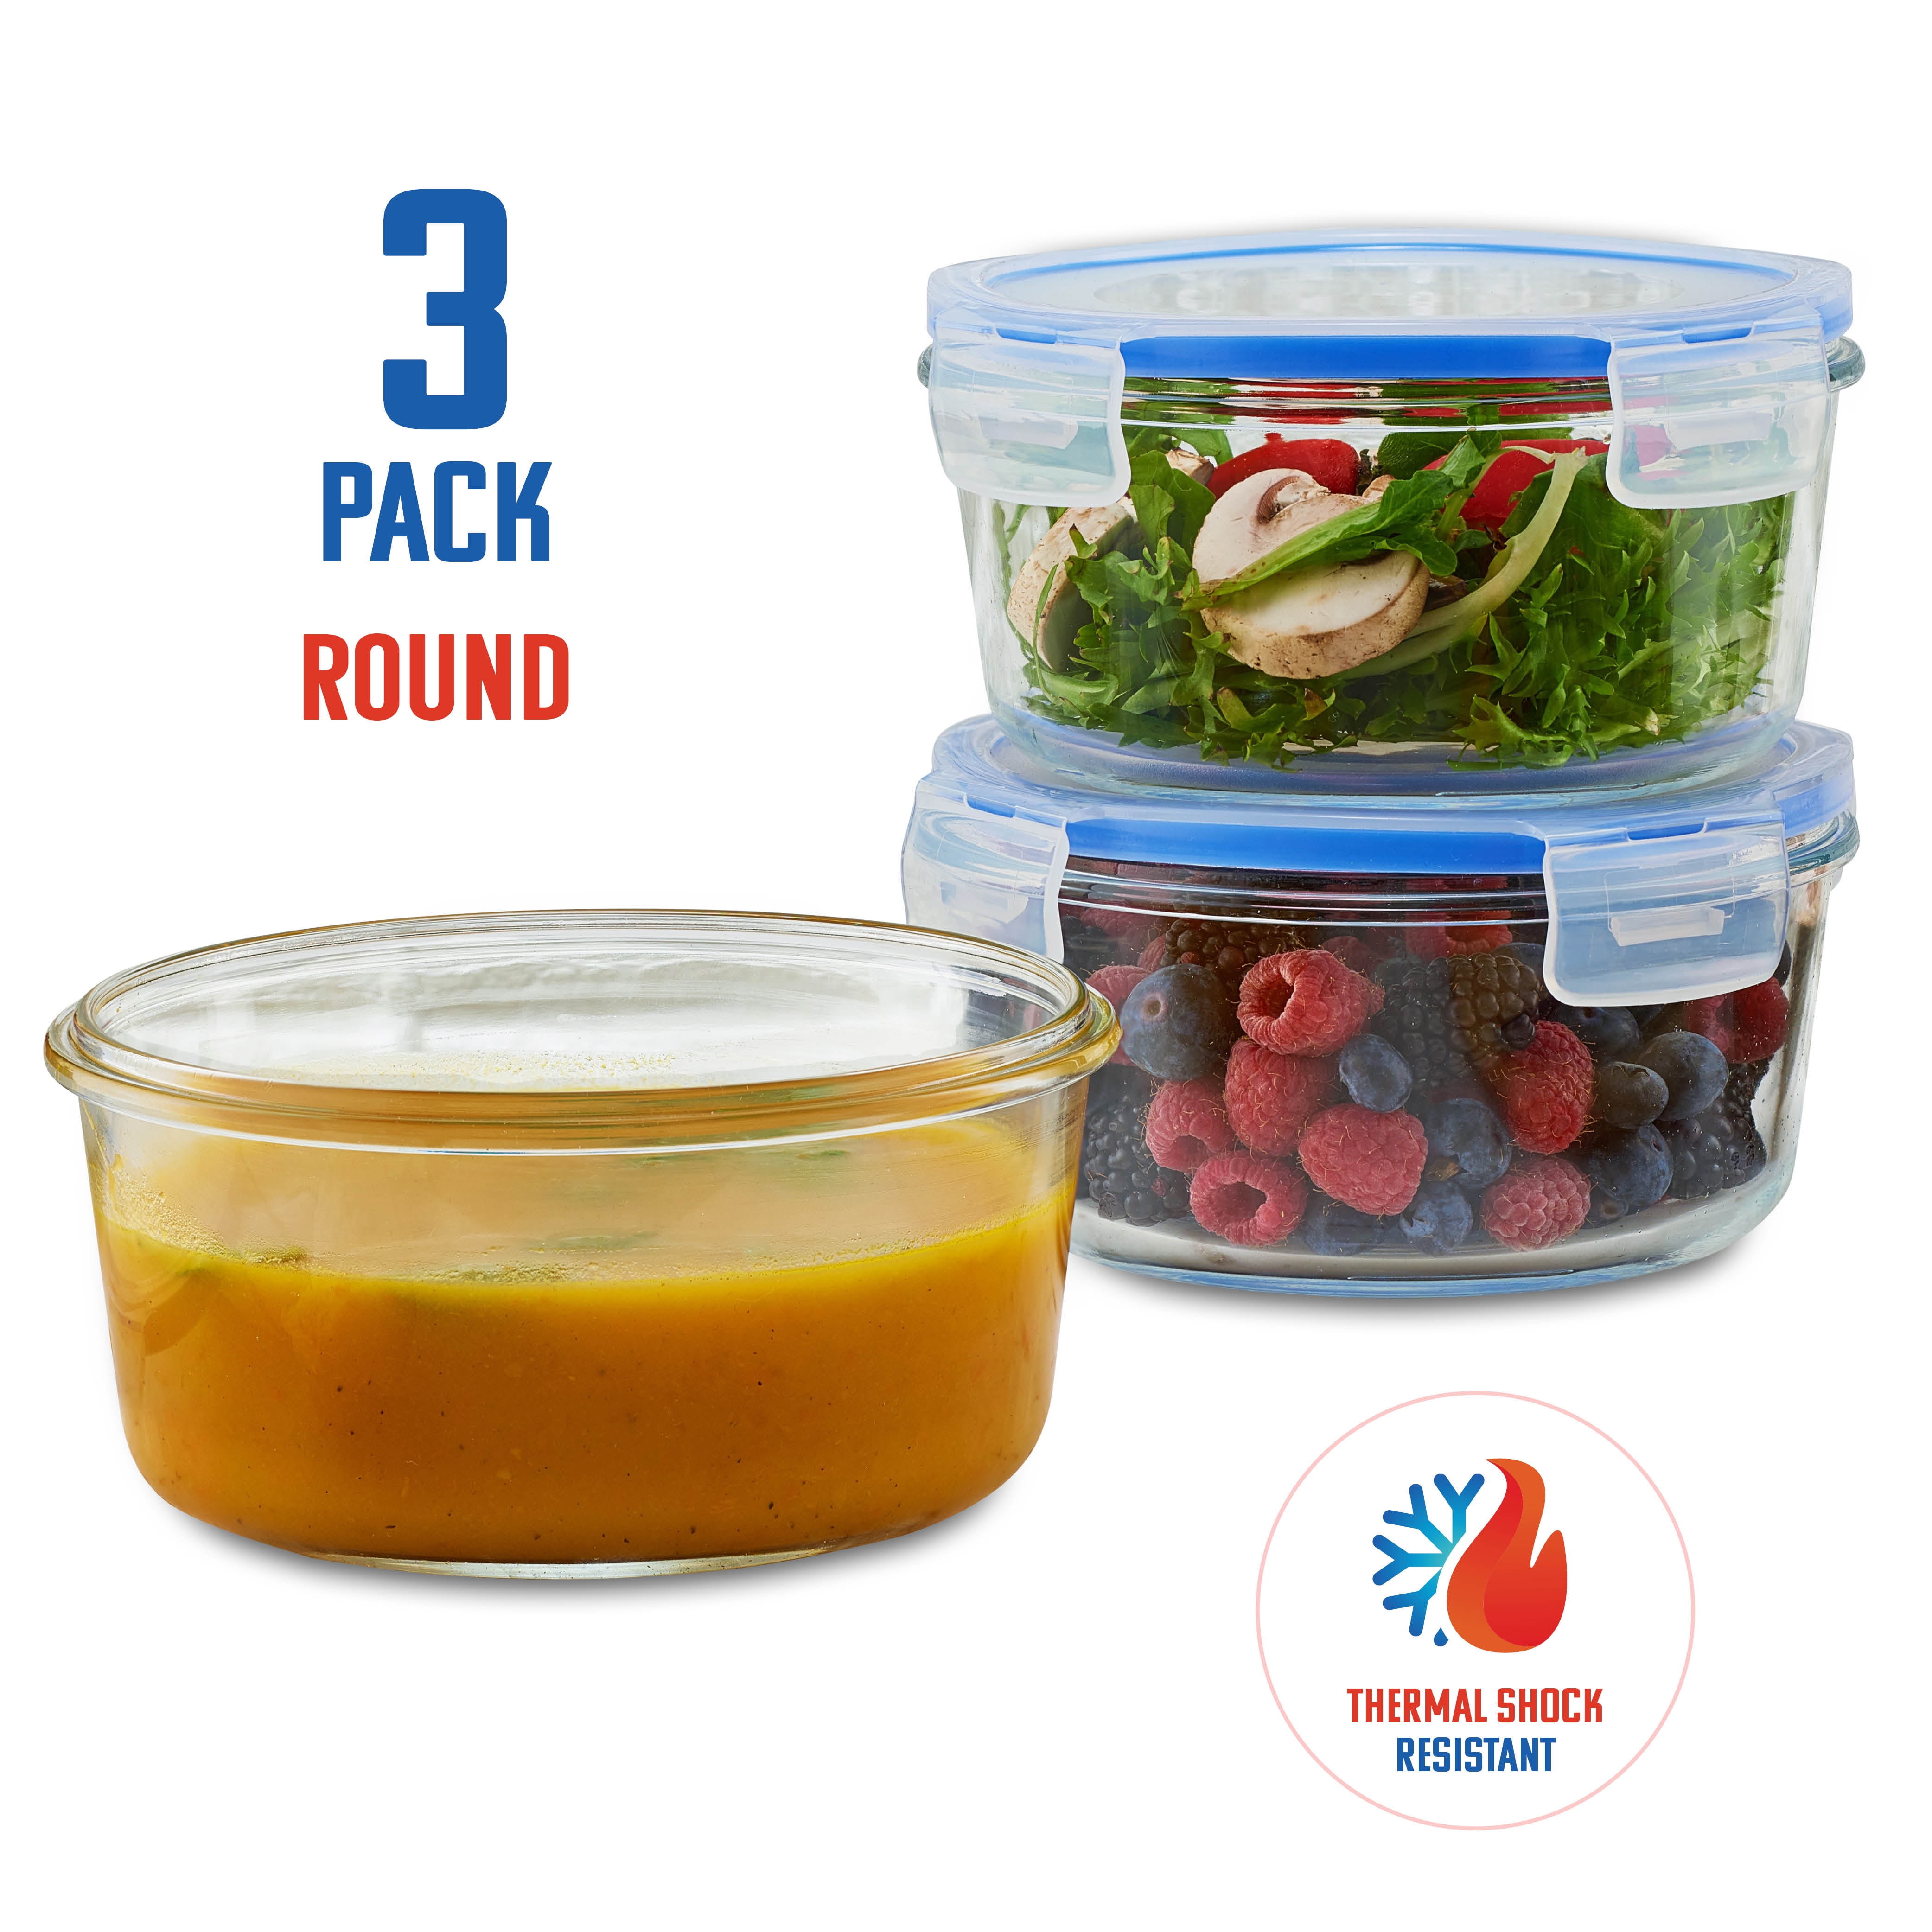 Portion Perfection Portion Control Meal Prep Containers 3pk, Weight Loss,  Borosilicate Glass. Health Eating, Practical Meal Prep, With Protein